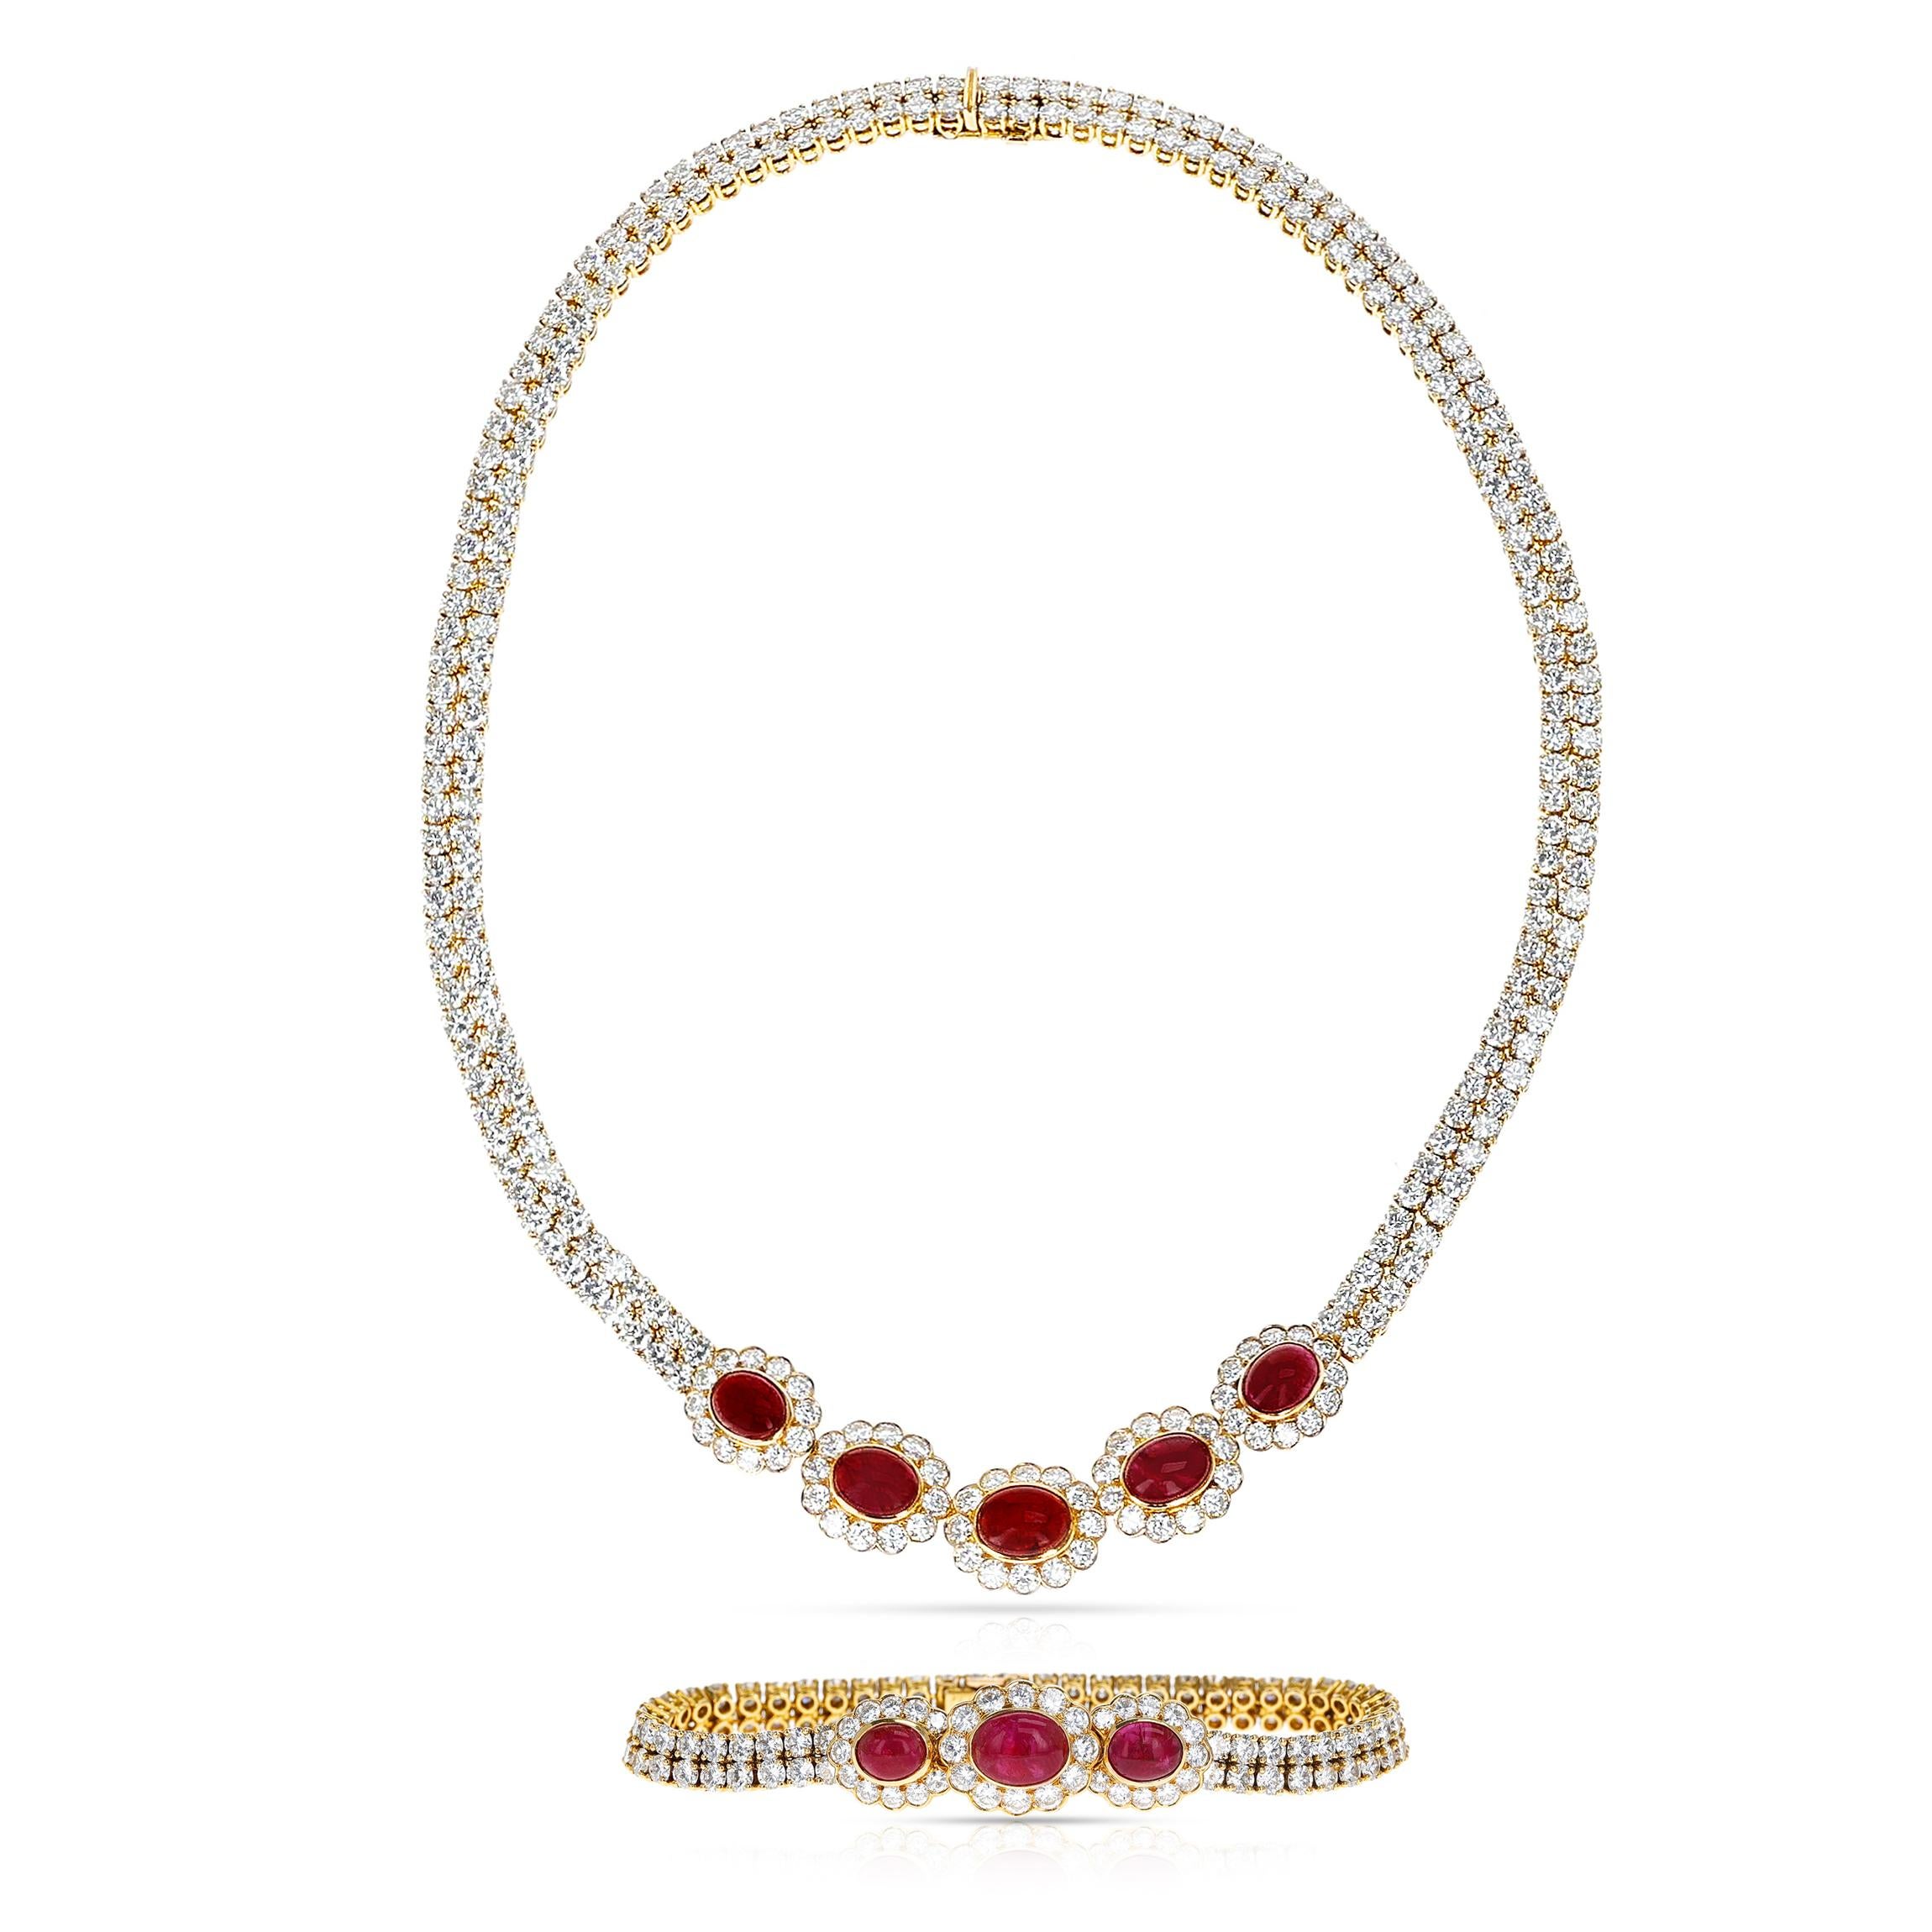 Van Cleef & Arpels Ruby Cabochon and Diamond Bracelet and Necklace Set, 18k For Sale 4